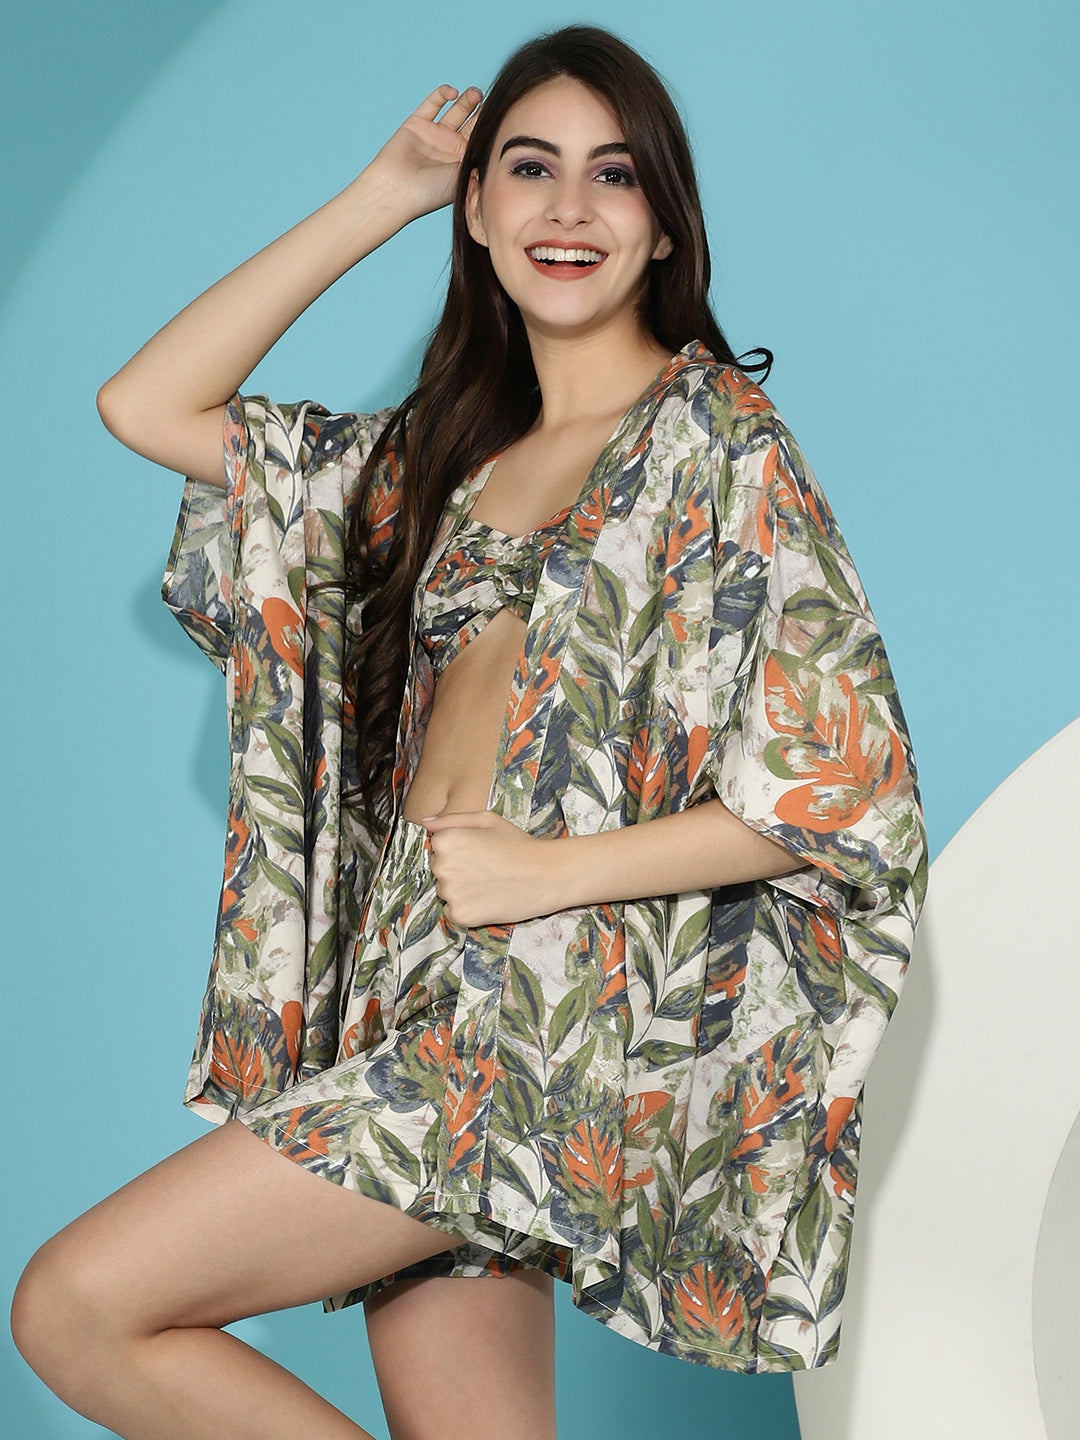 Cream Color Floral Printed Viscose Rayon 3 Pcs Cover up Beachwear with Robe Claura Designs Pvt. Ltd. Beachwear 3 pcs, Beachwear, Beachwear_size, Coverup, cream color, Floral, Printed, Rayon